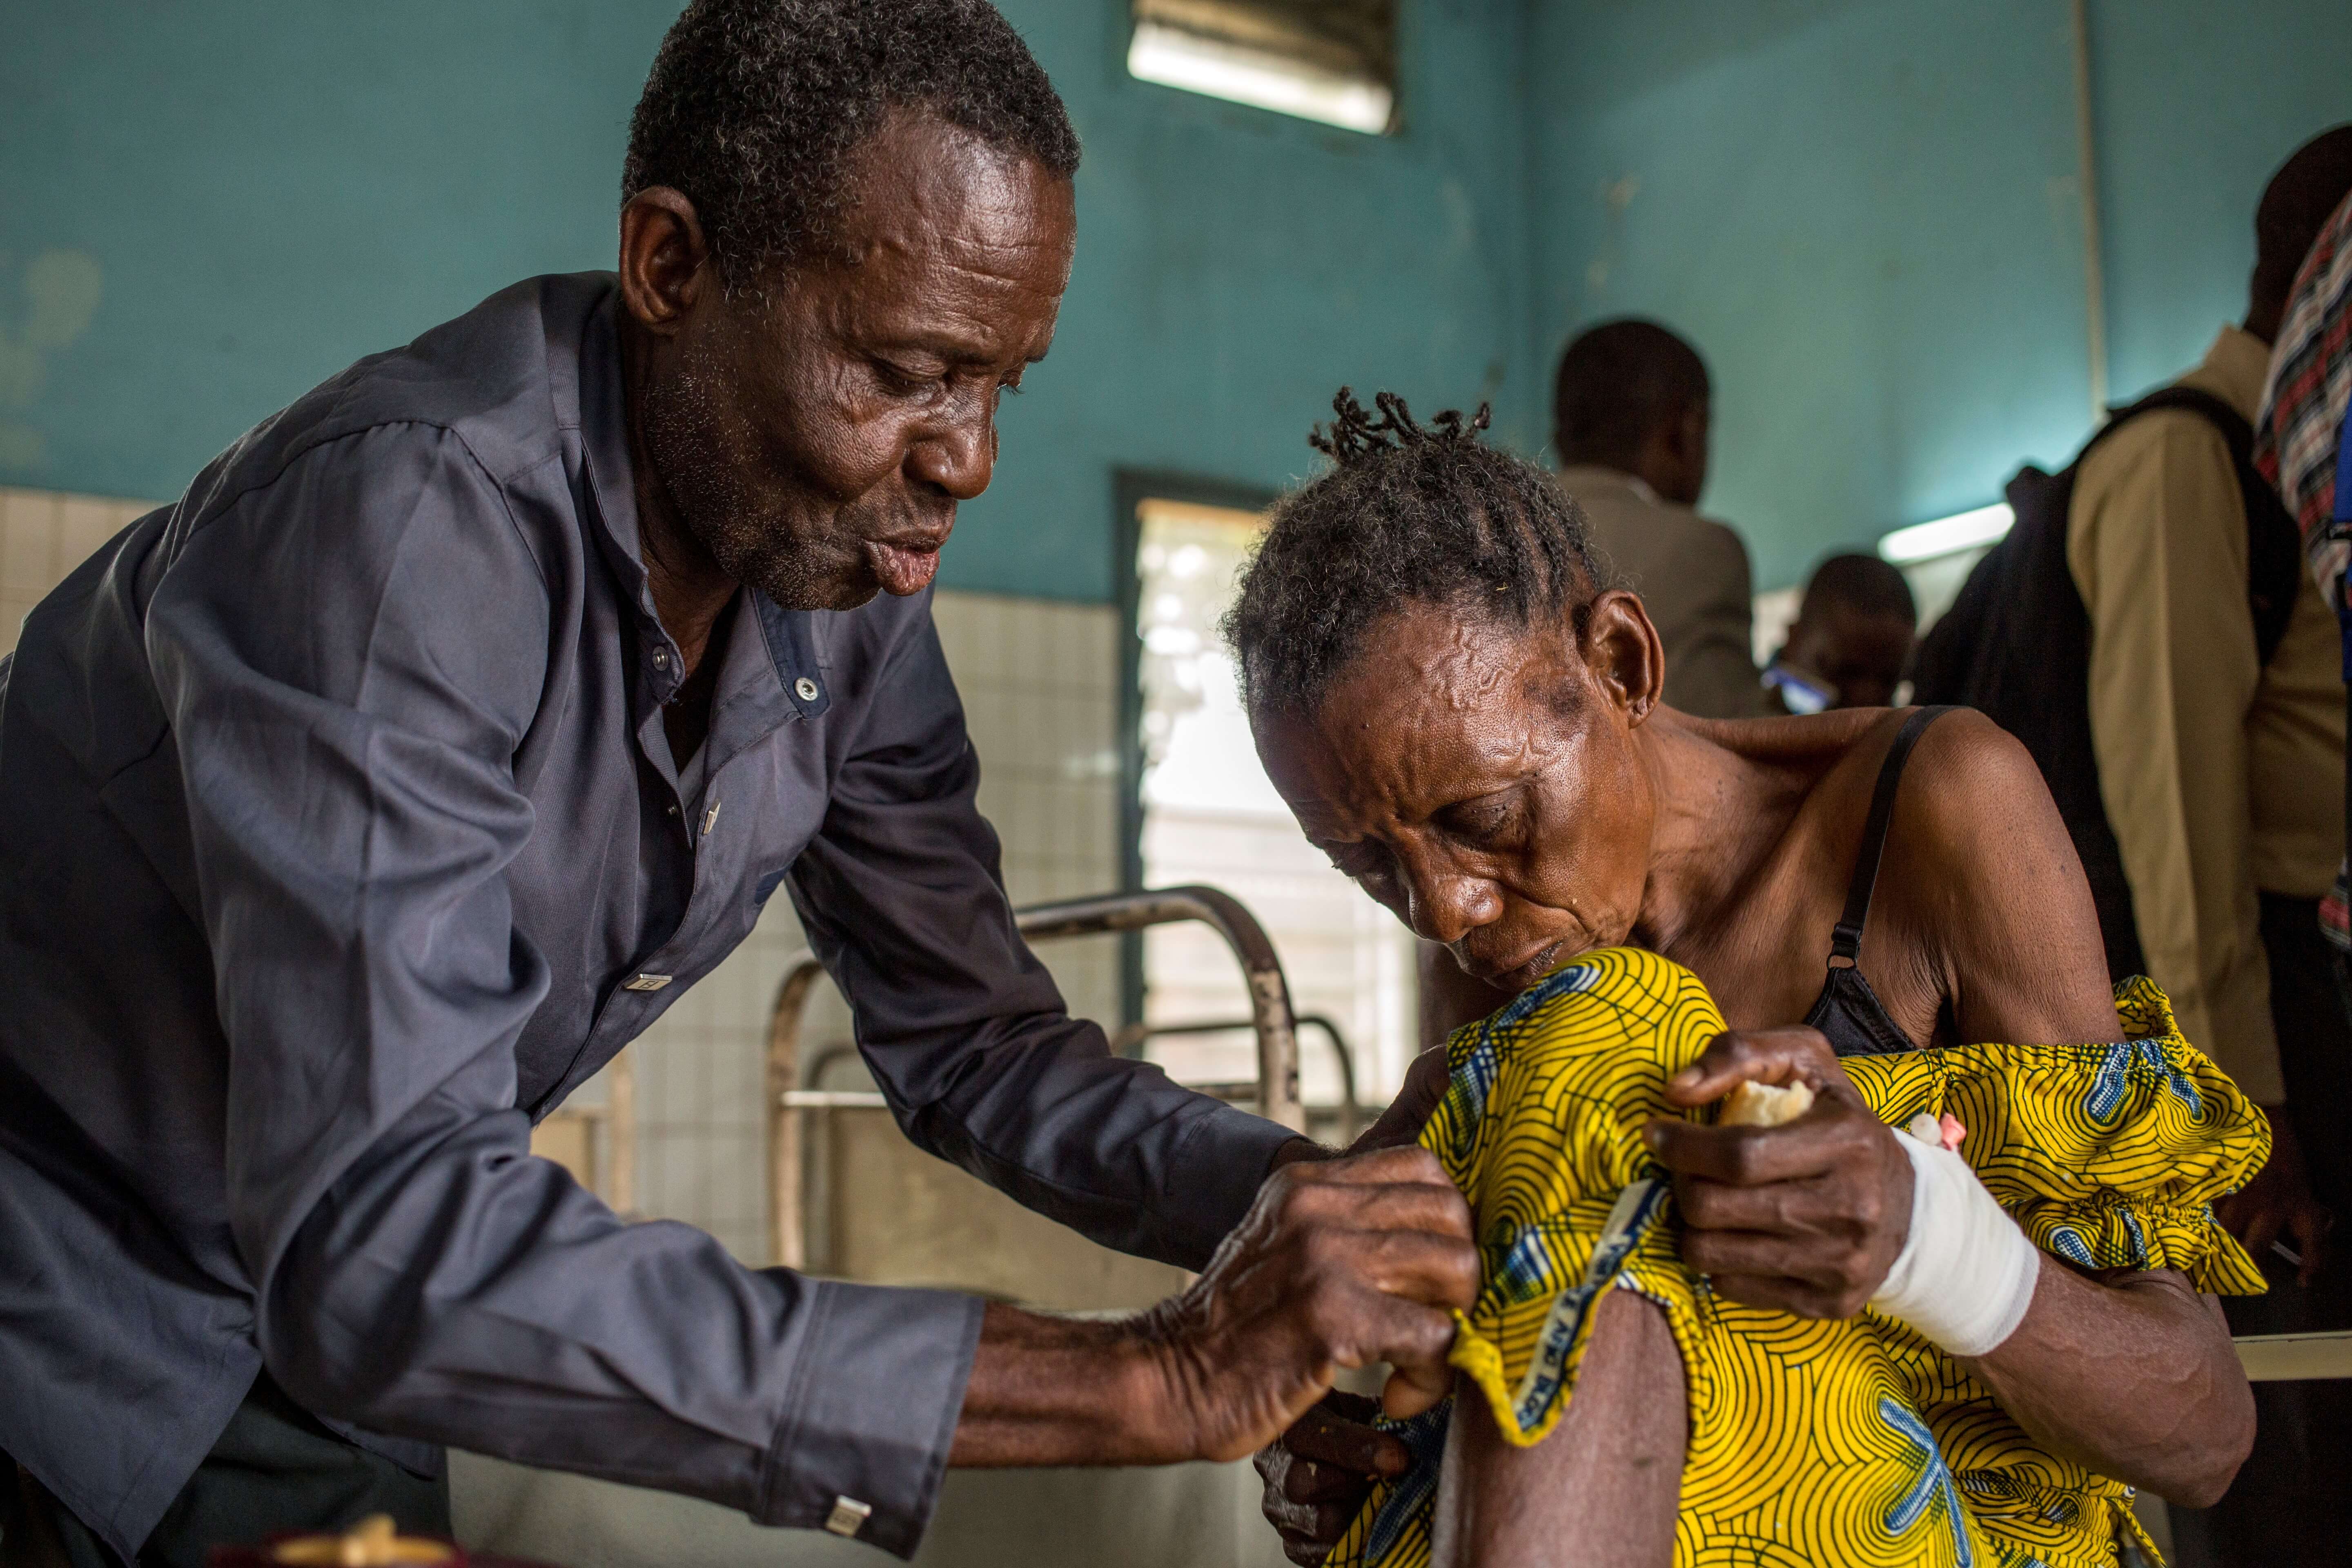 A patients with sleeping sickness in the DRC